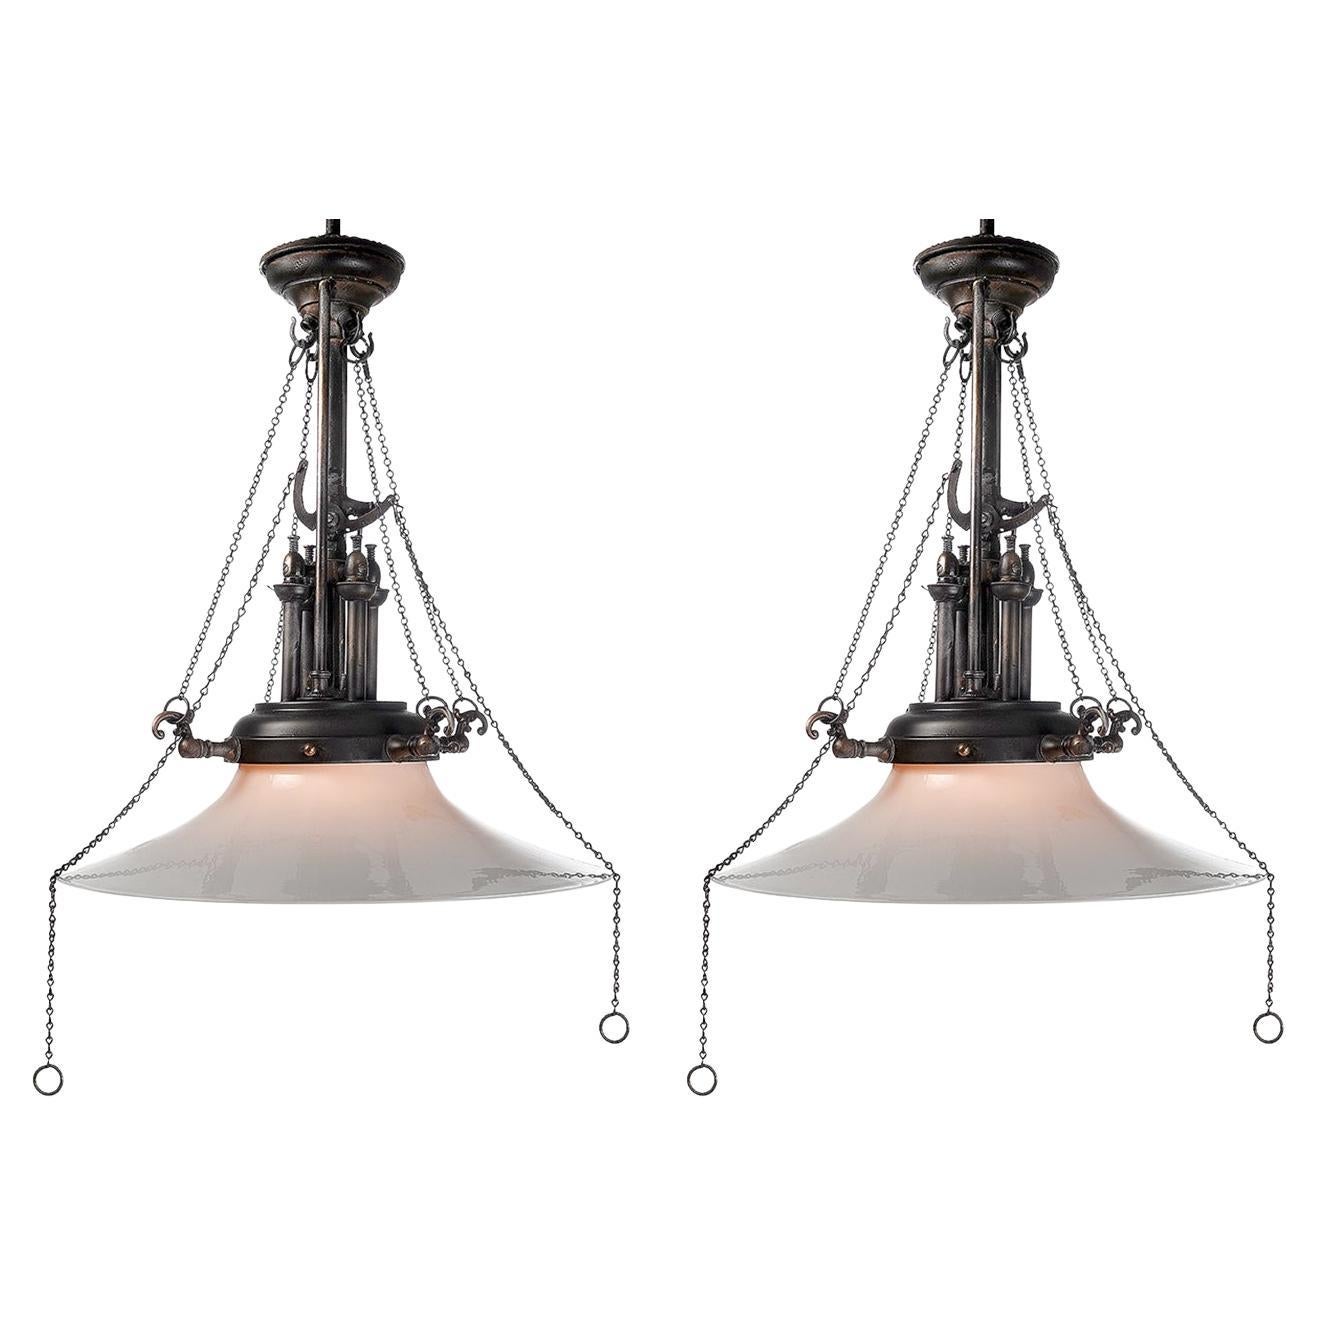 Very Early Impressive, Unique And Complex Gas Lamp - Matching Pair